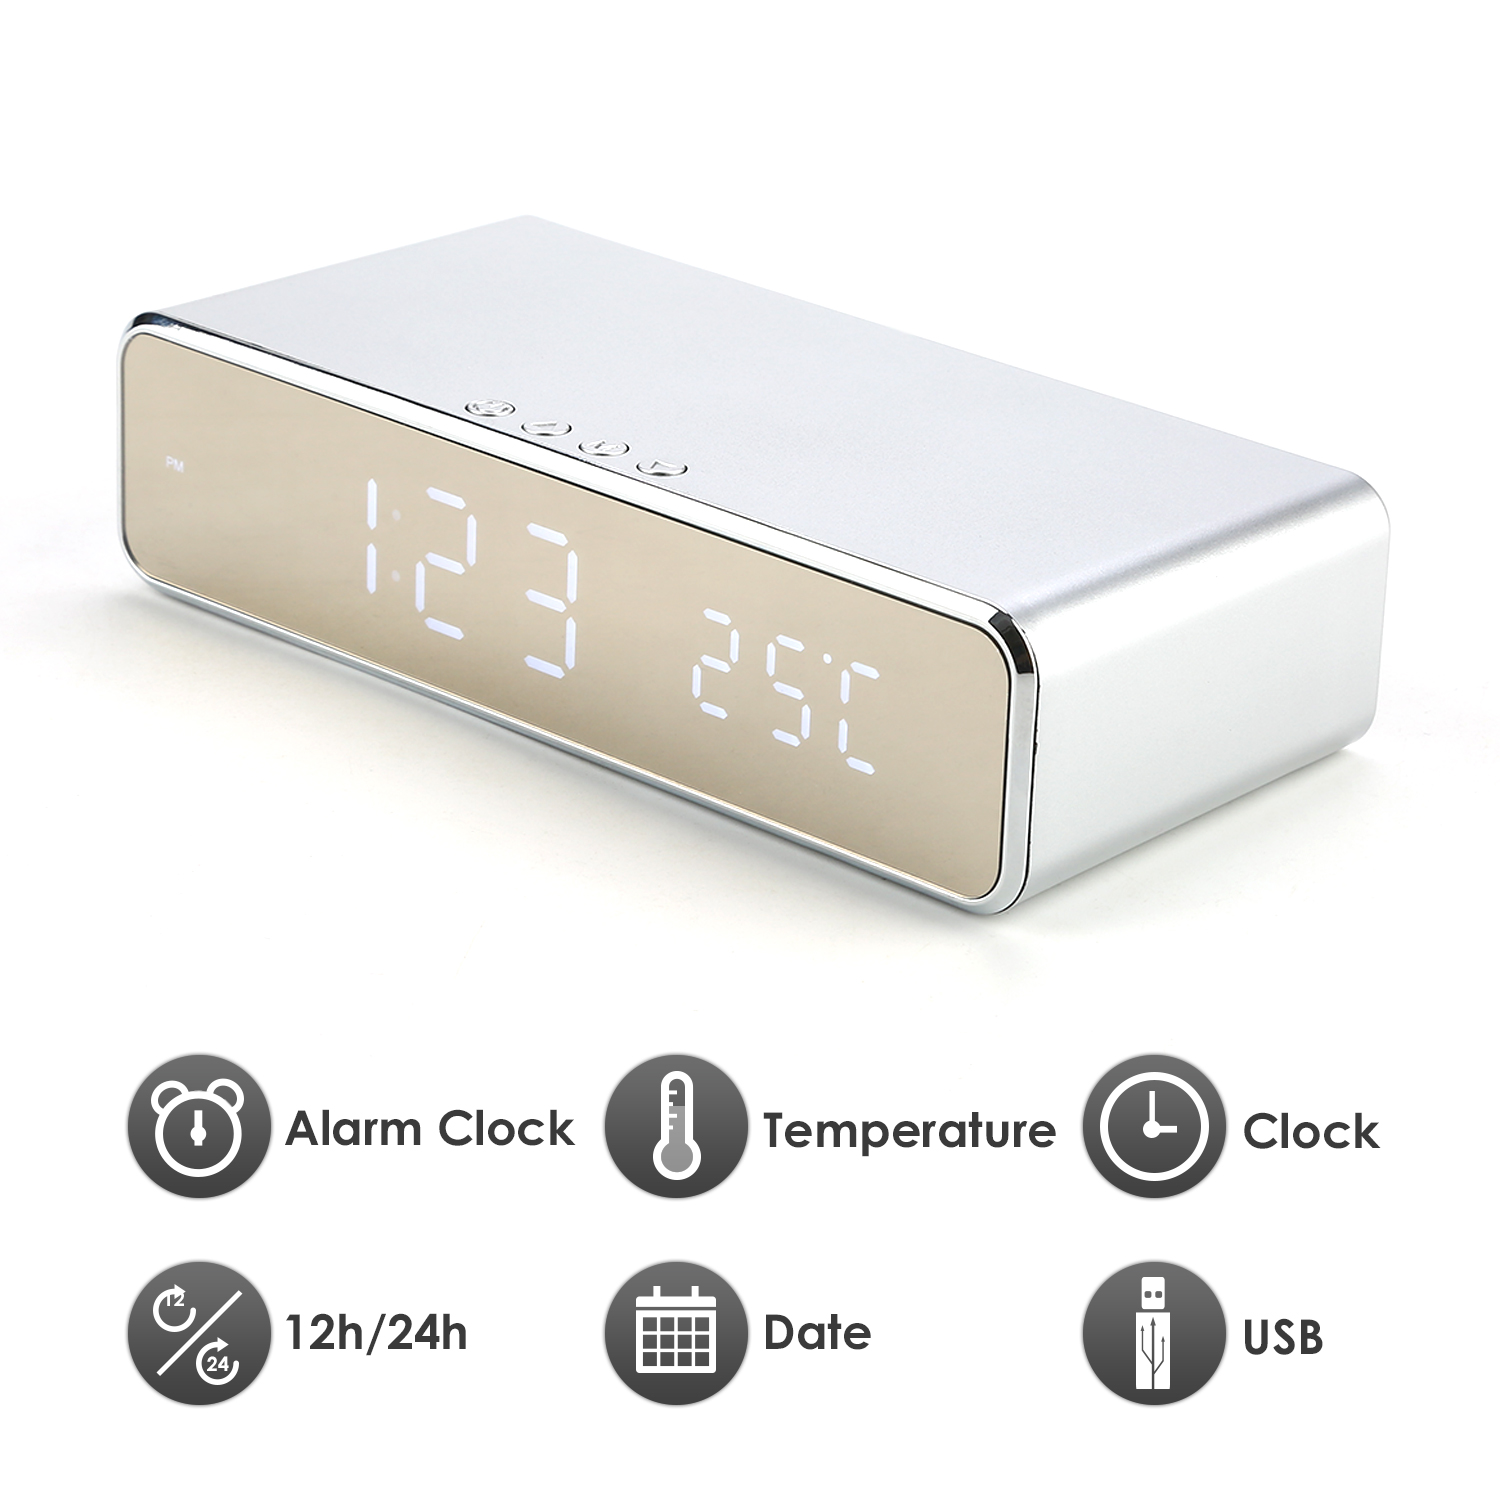 Digital Alarm Clock with Qi Wireless Charging Pad Home Desk Clock Temperature Date Display Charging for iPhone Samsung Huawei